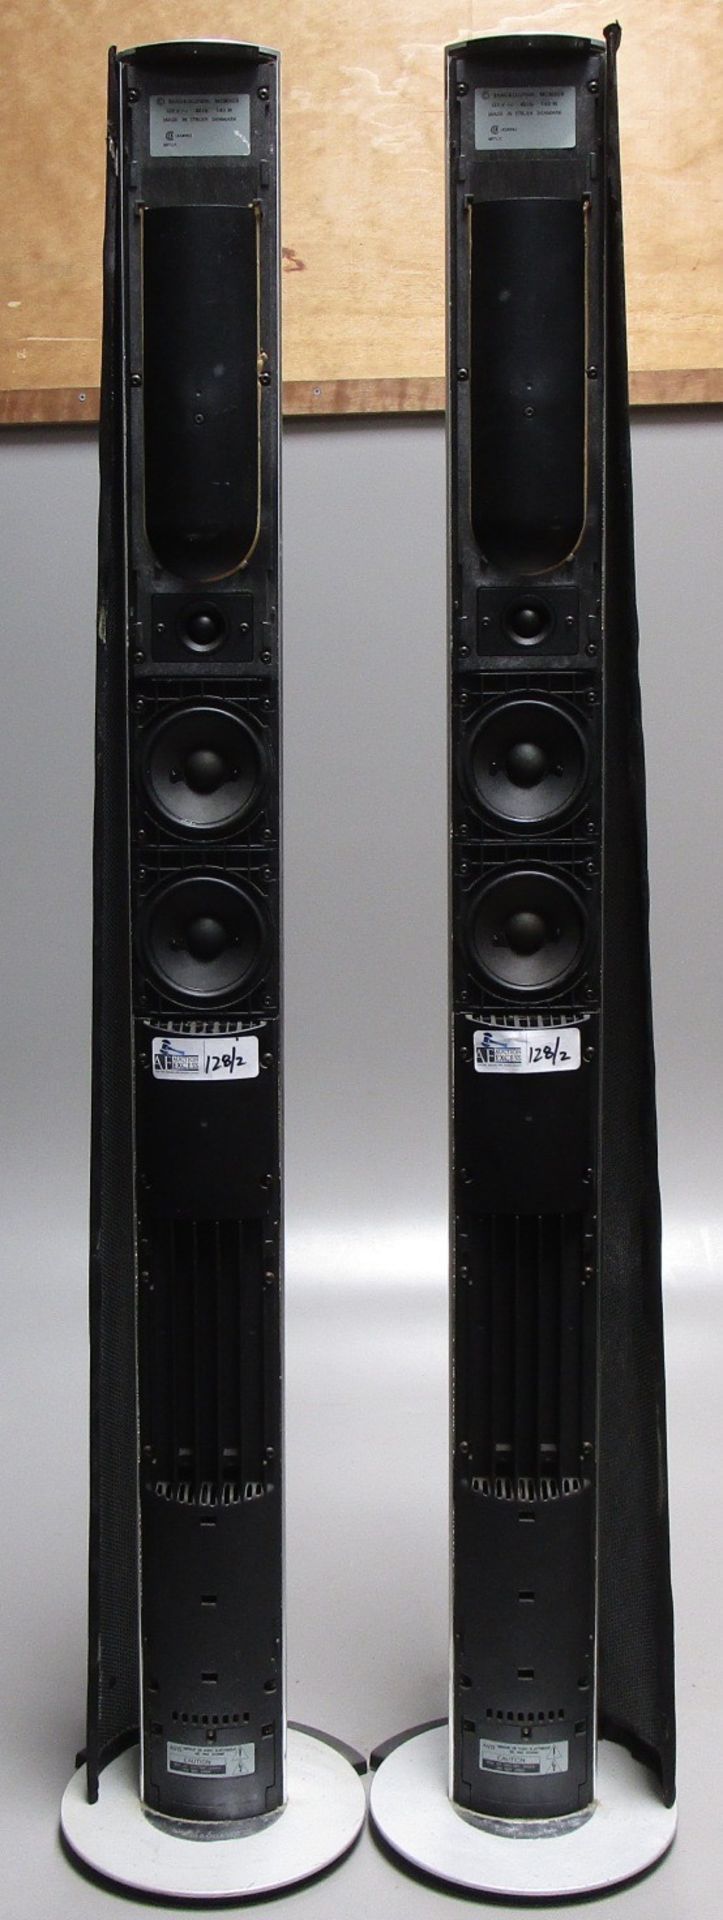 LOT OF 2 BANG & OLUFSEN MCMXC11 SPEAKERS TESTED AND WORKING - Image 2 of 5